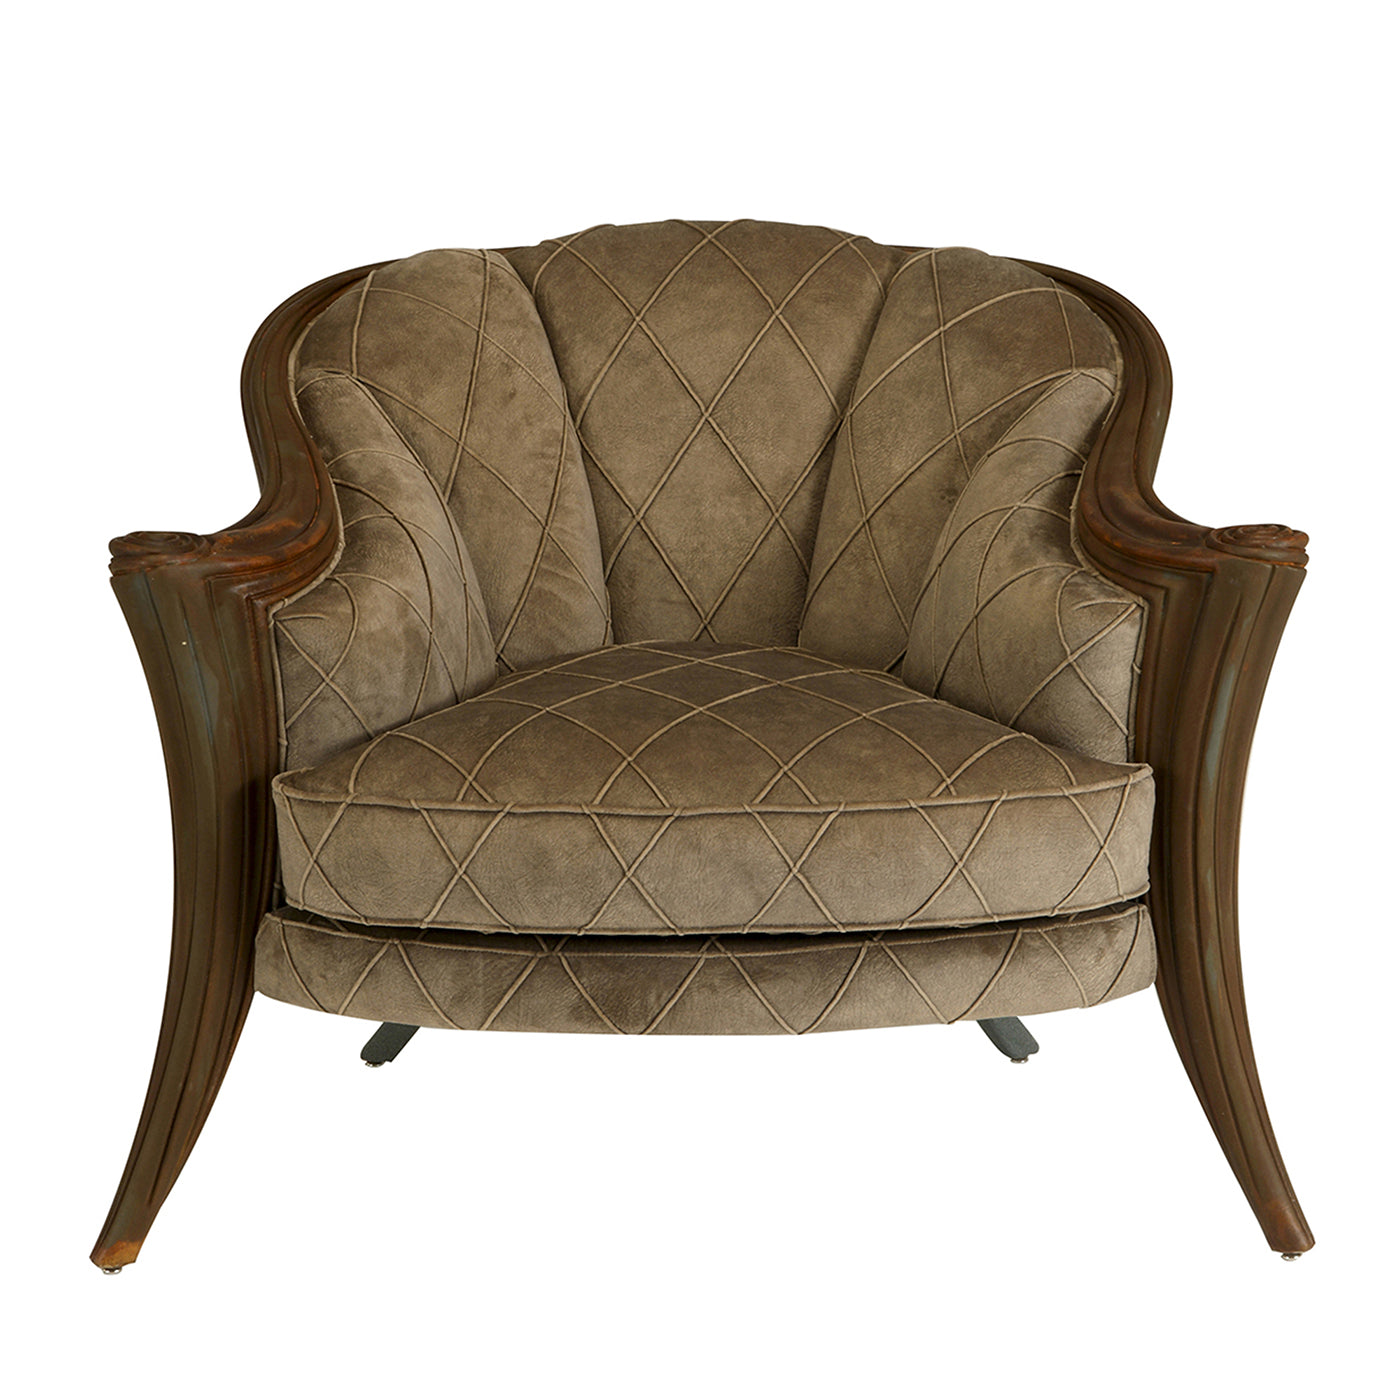 Opus Futura Upholstered Armchair Brown by Carlo Rampazzi - Main view